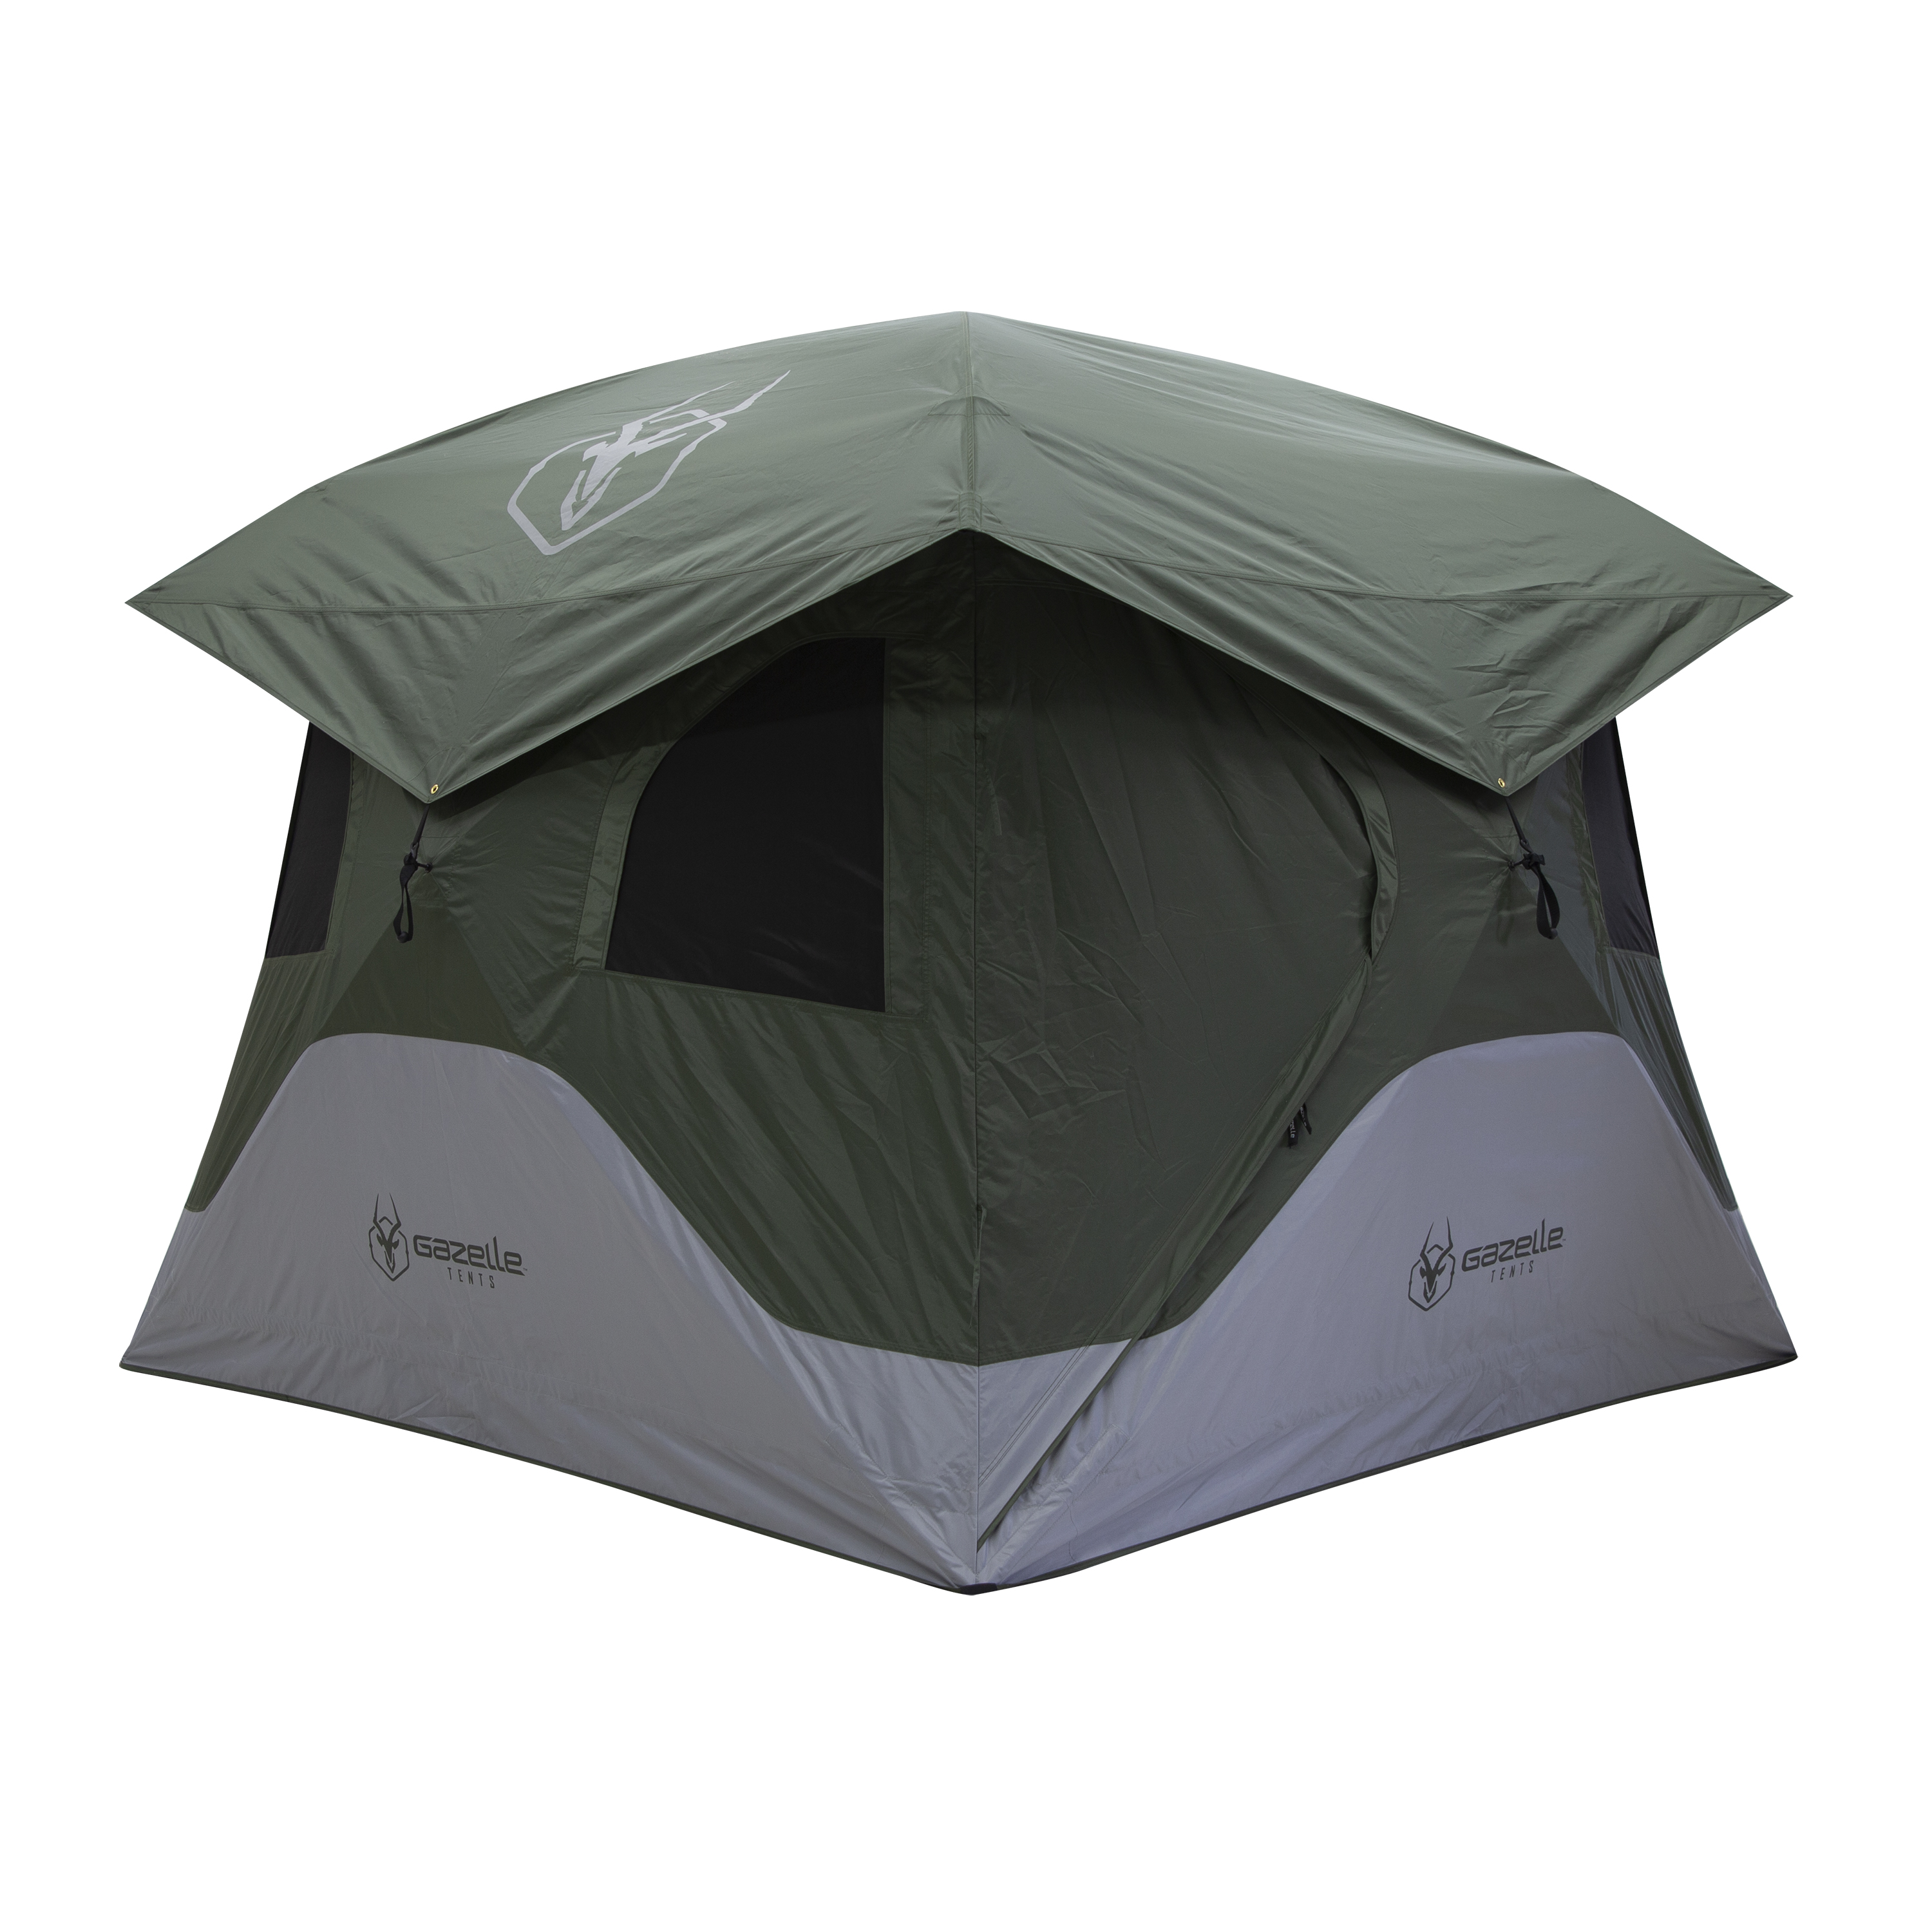 Gazelle Tents™ T4 Portable Hub Tent, 4-Person, Alpine Green, GT400GR - image 1 of 12